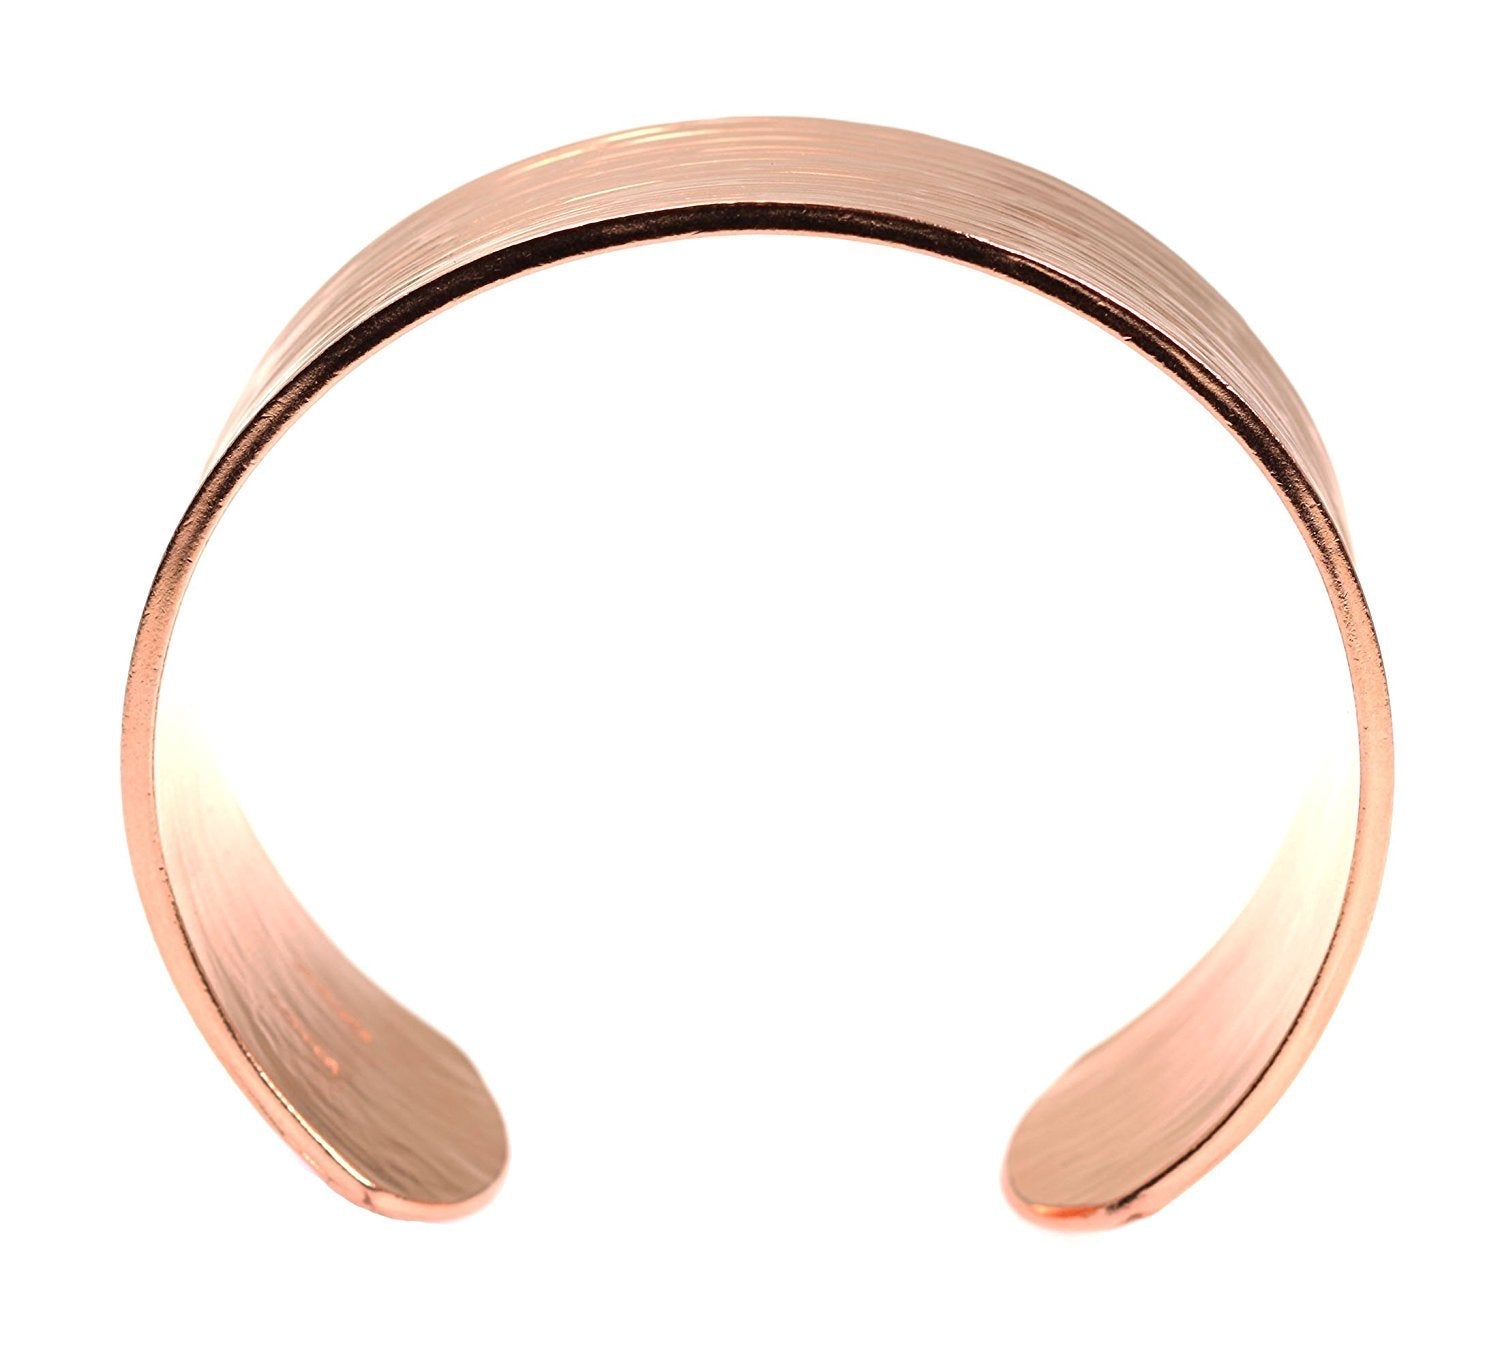 Shape of 3/4 Inch Wide Chased Copper Bark Cuff Bracelet